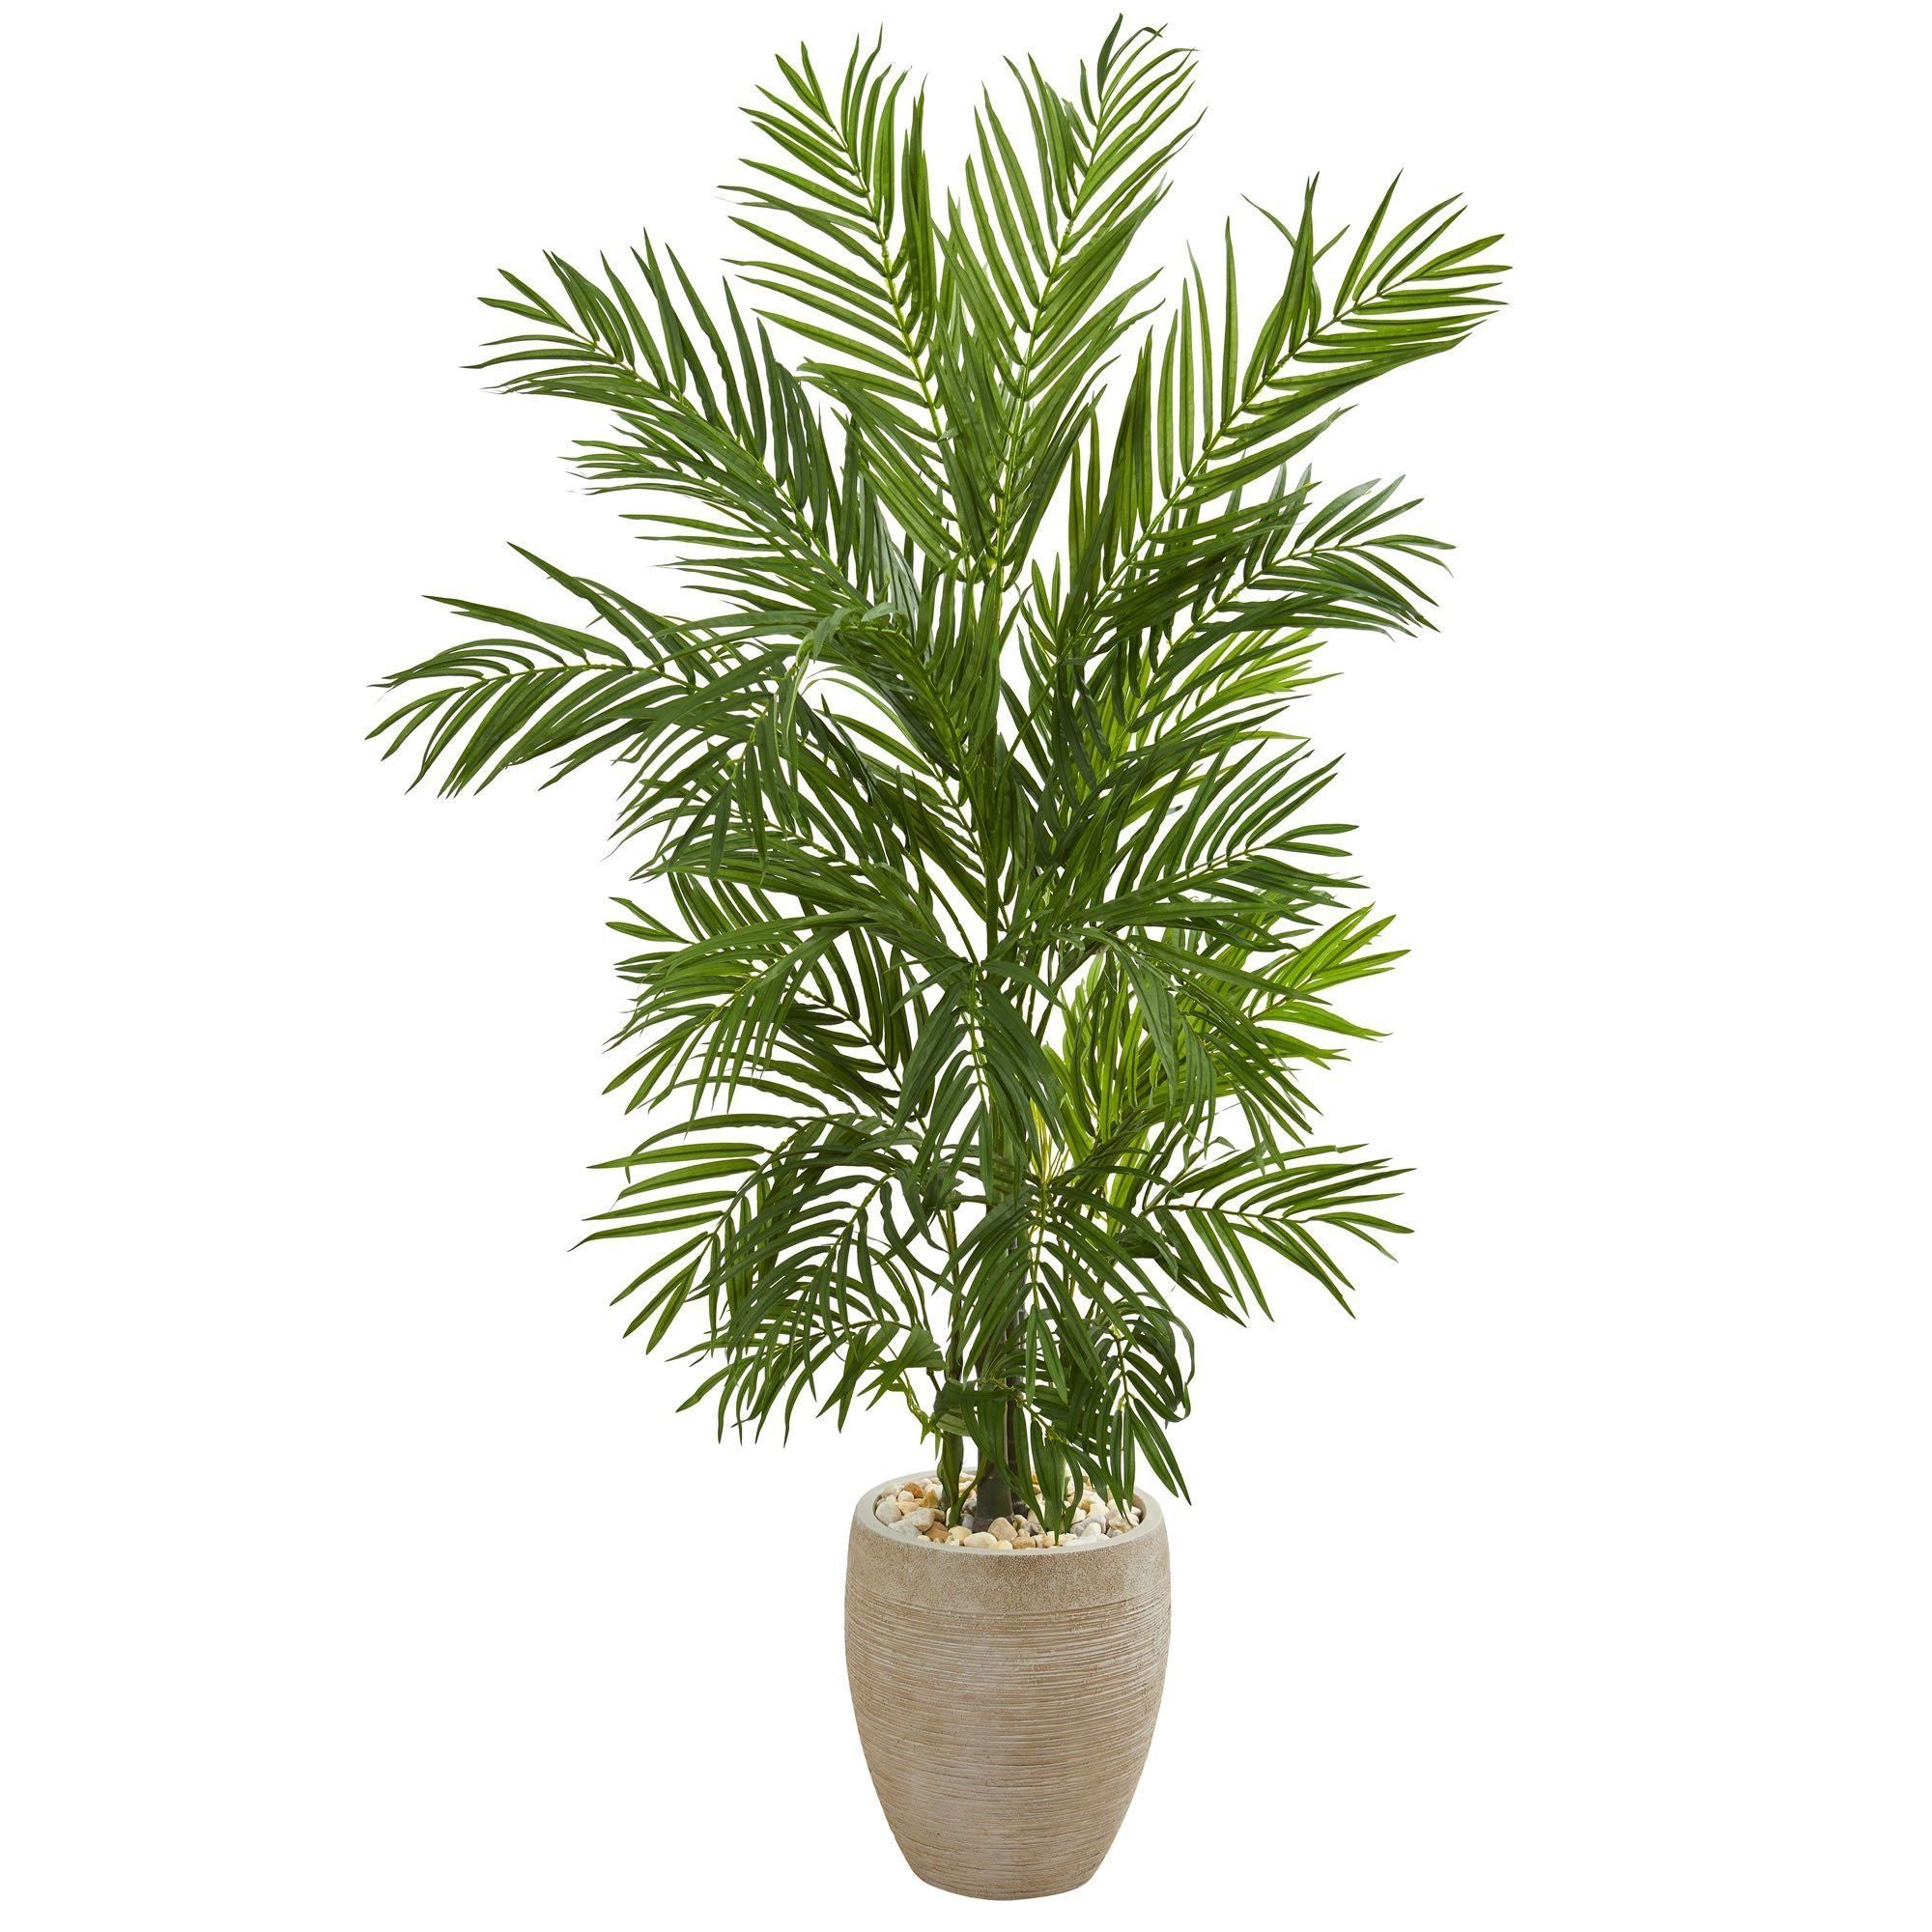 Image of 4.5’ Areca Palm Artificial Tree in Sand Colored Planter